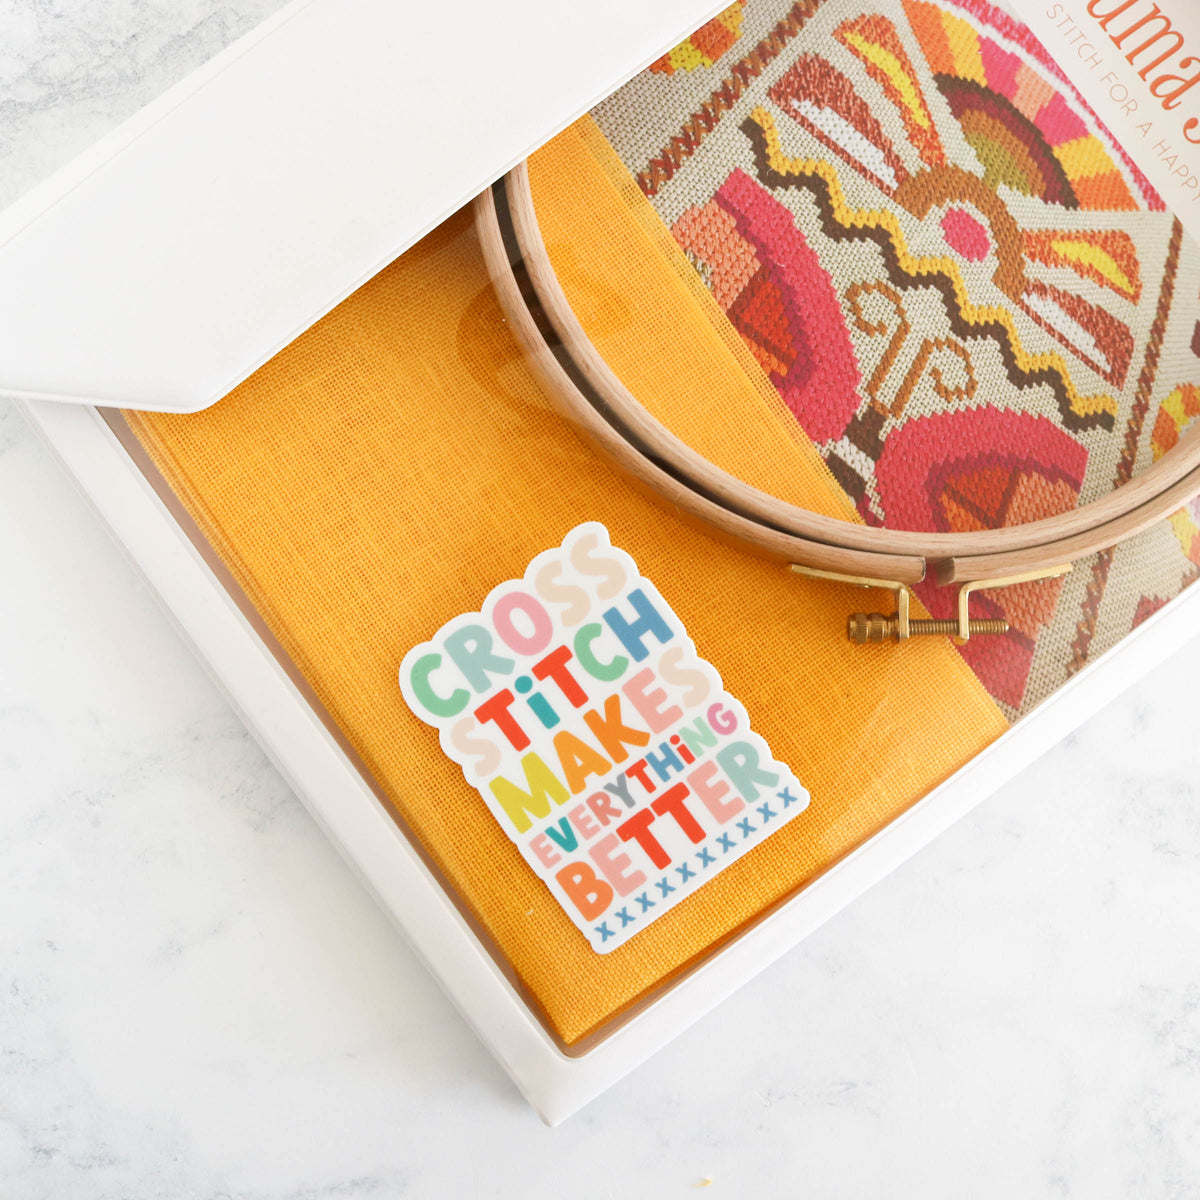 Stitchy Stickers - Cross Stitch Makes Everything Better